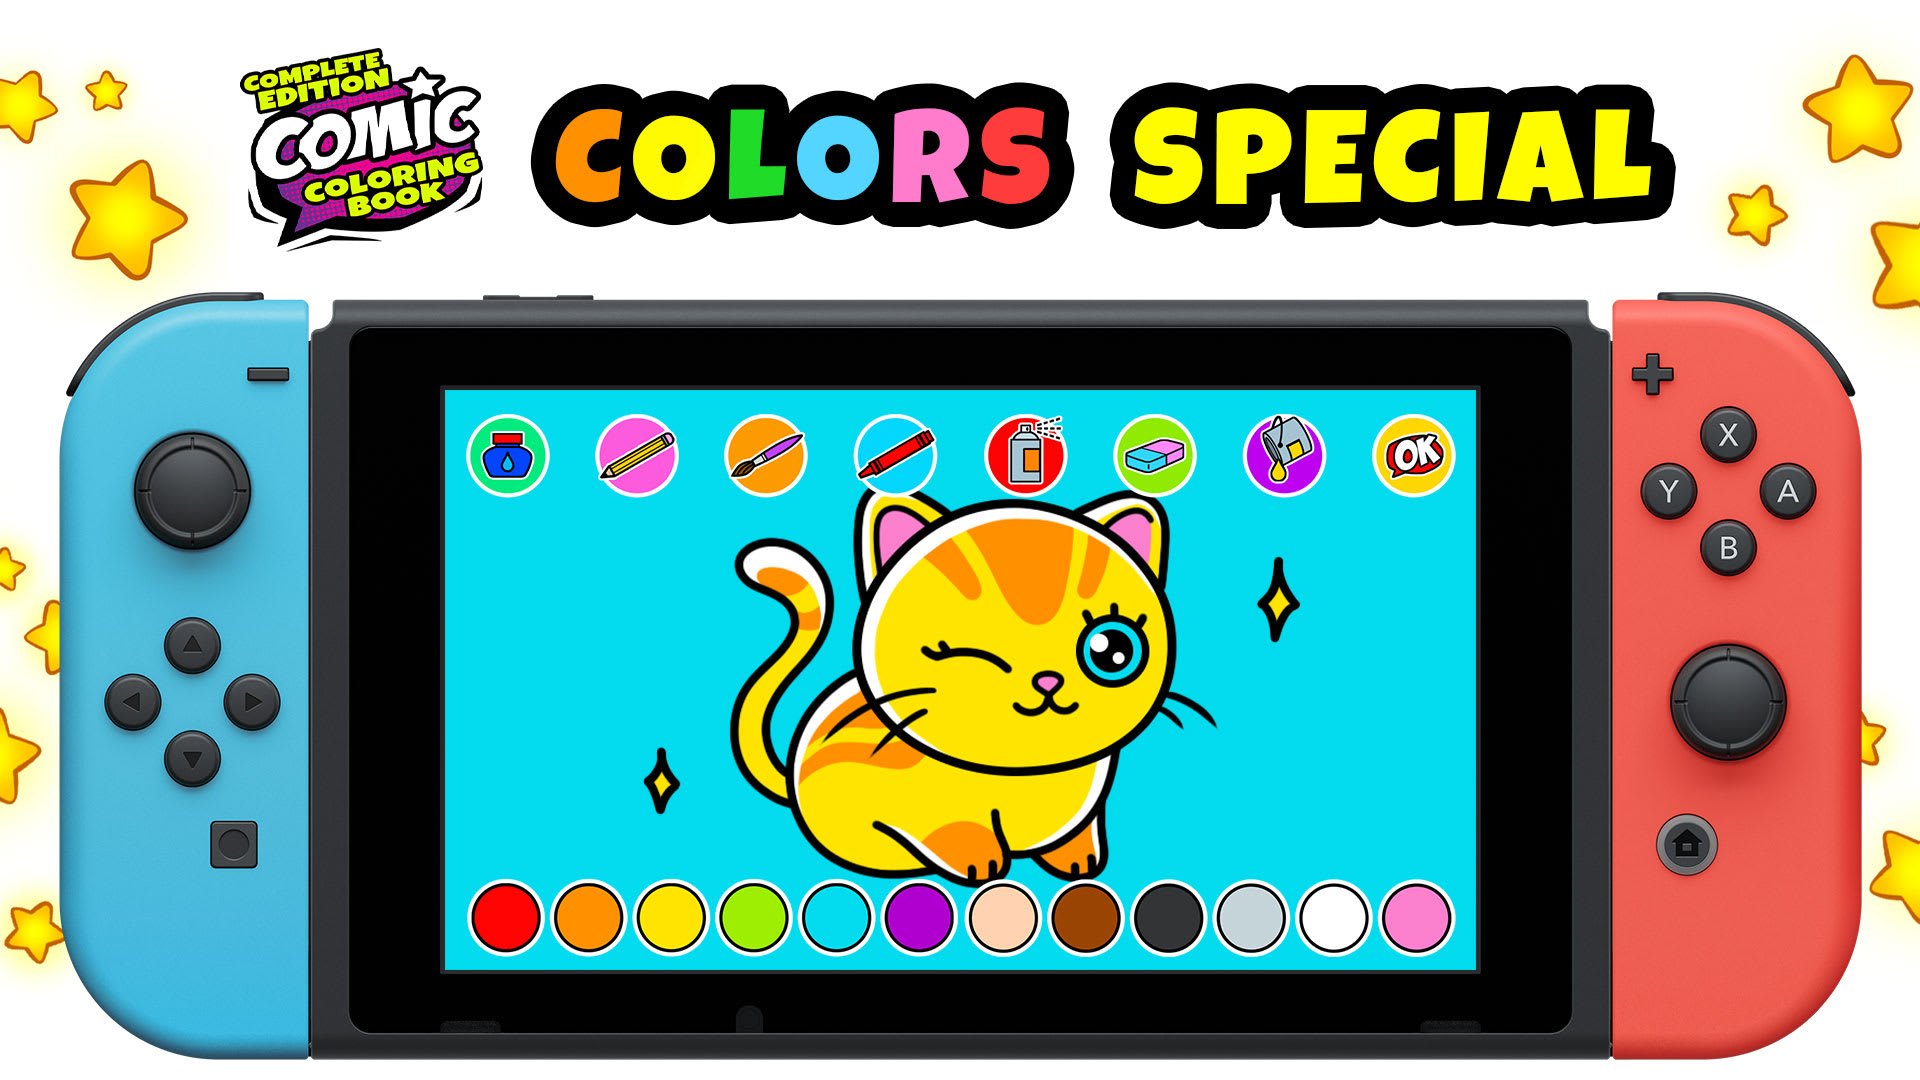 Comic Coloring Book Complete Edition: COLORS Special 1